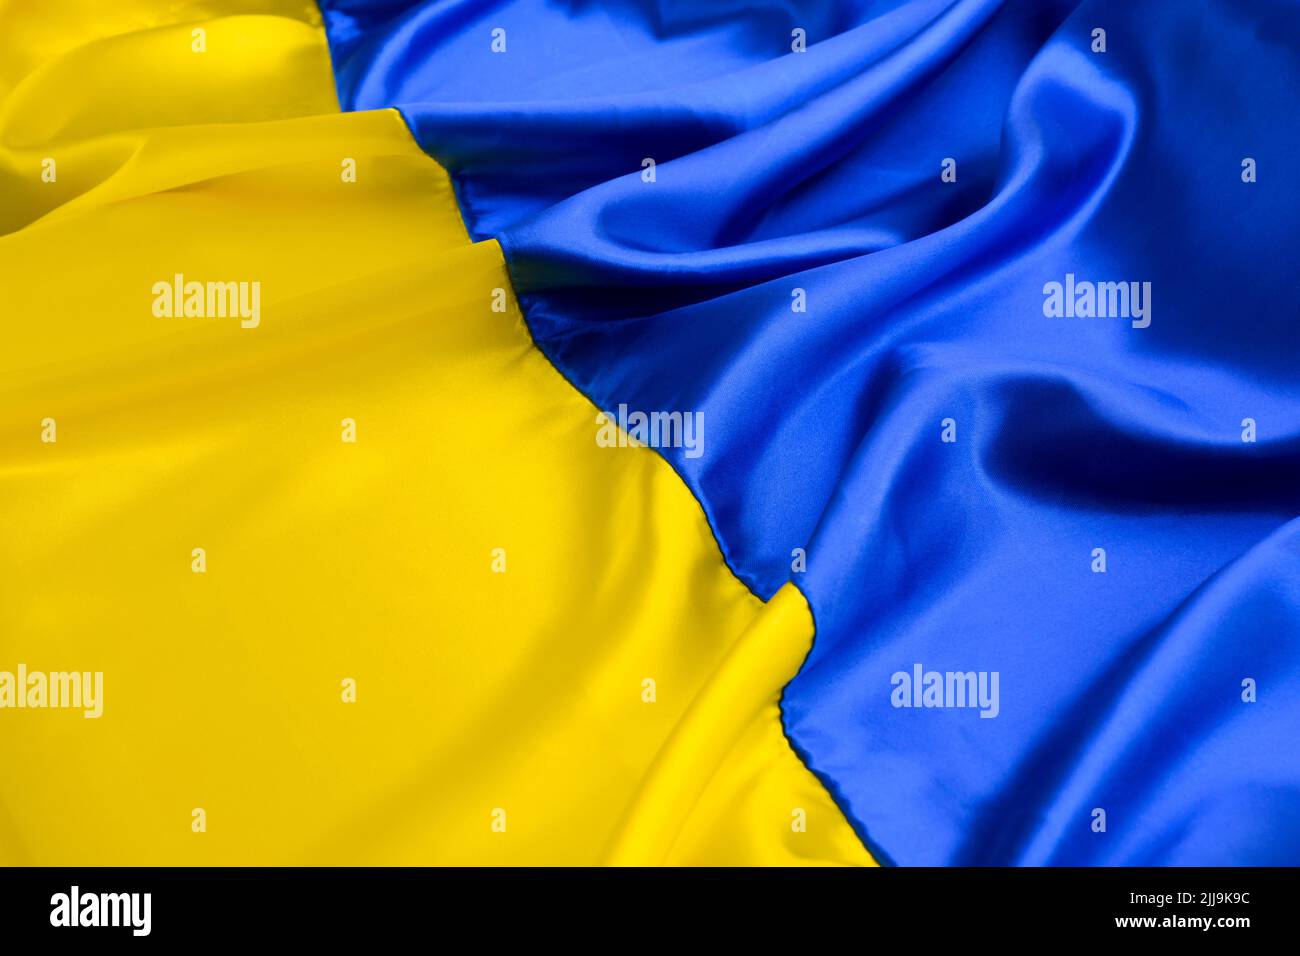 Fabric wave flag of Ukraine, UA. Blue and yellow bright colors. Close up curved texture background Stock Photo